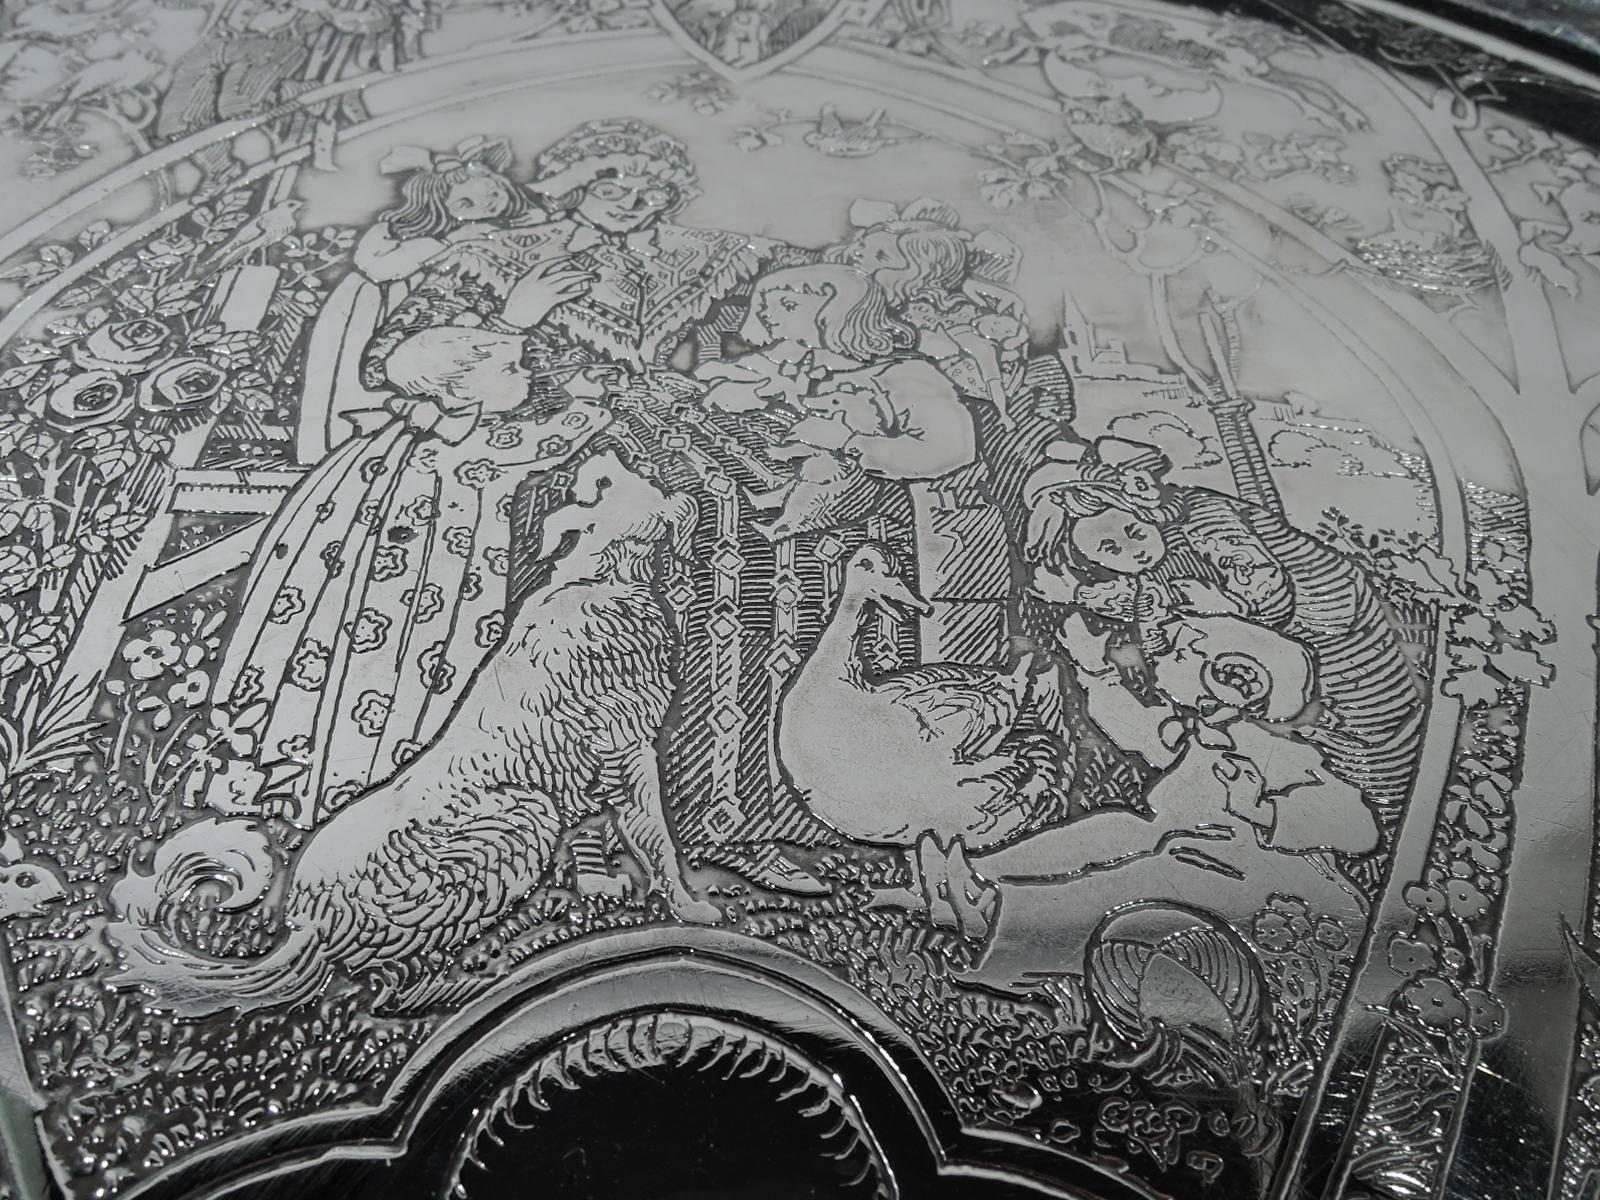 Edwardian sterling silver highchair tray. Retailed by Cartier in New York, 1910. Lunette-form with acid-etched scenes from Mother Goose, including Little Red Riding Hood, the Three Bears, and Humpty Dumpty. In center frame sits the old dame herself